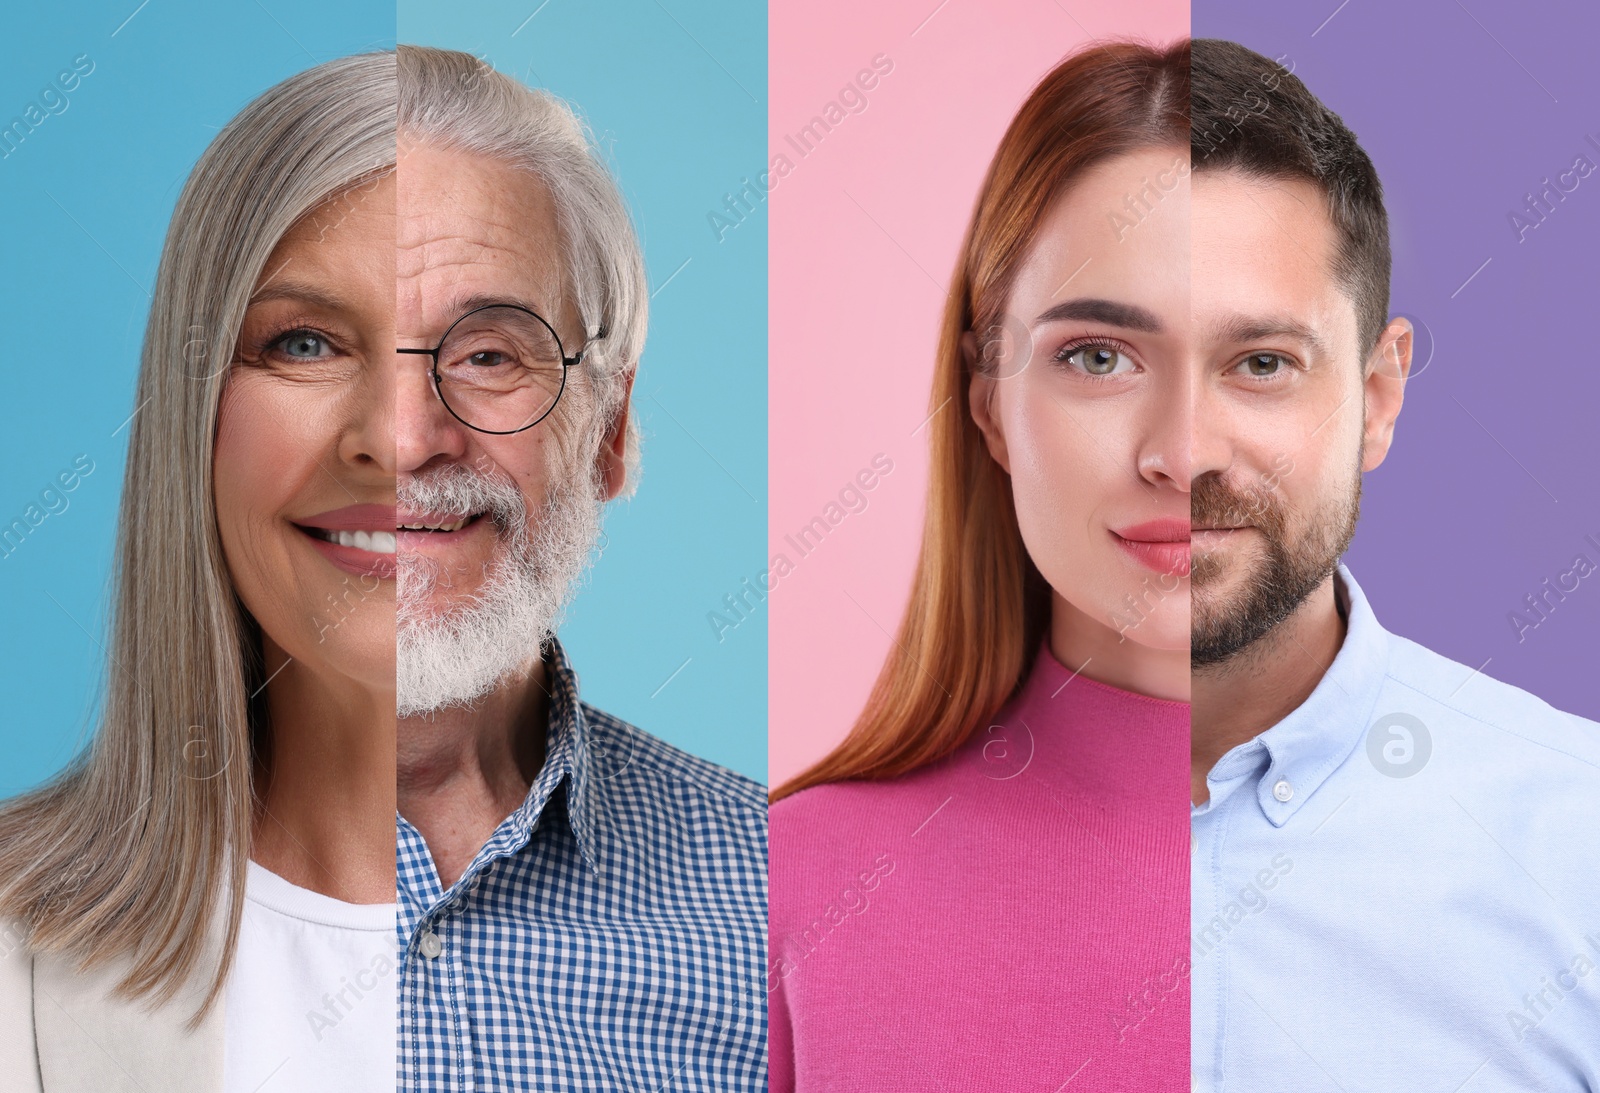 Image of Men and women of diverse ages on color backgrounds. Collage with parts of different people's photos